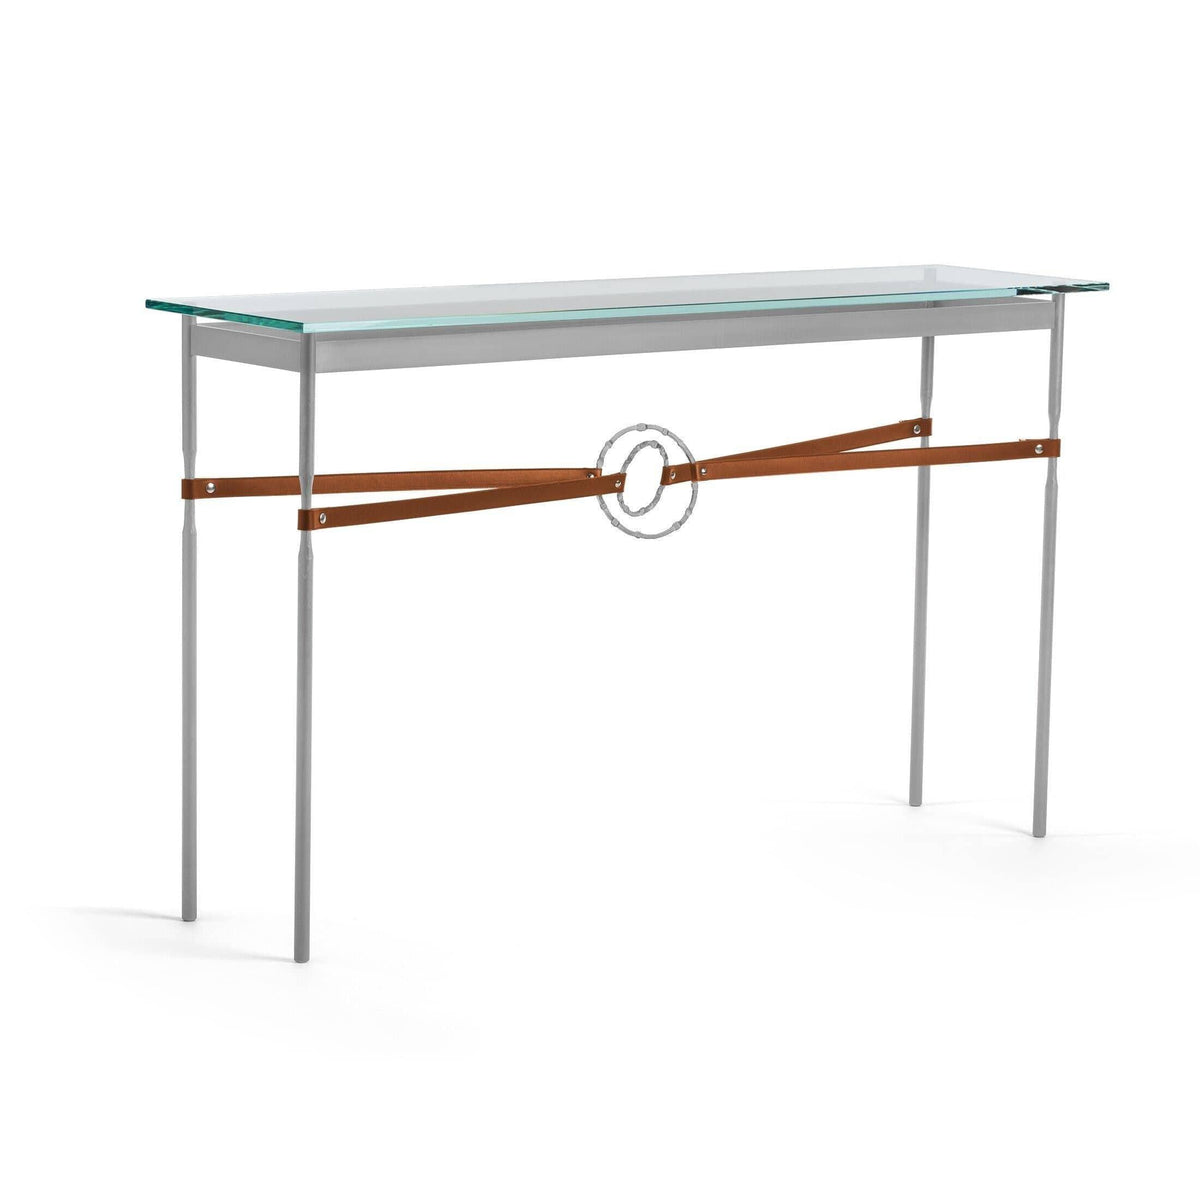 Hubbardton Forge - Equus Chestnut Leather Console Table - 750118-82-82-LC-VA0714 | Montreal Lighting & Hardware